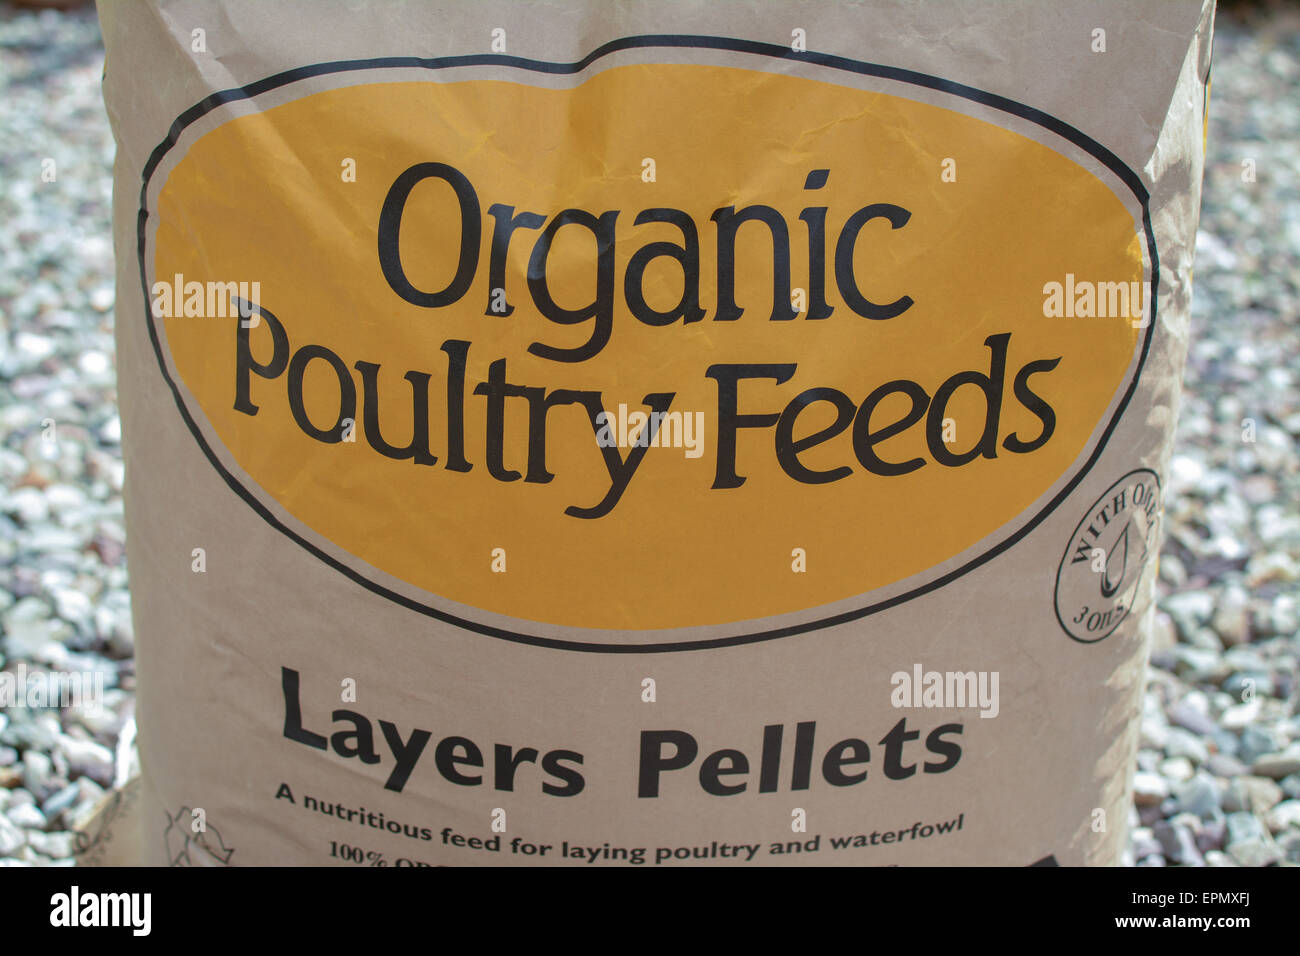 Close up of sack of Layers Pellets Organic Poultry feed Stock Photo